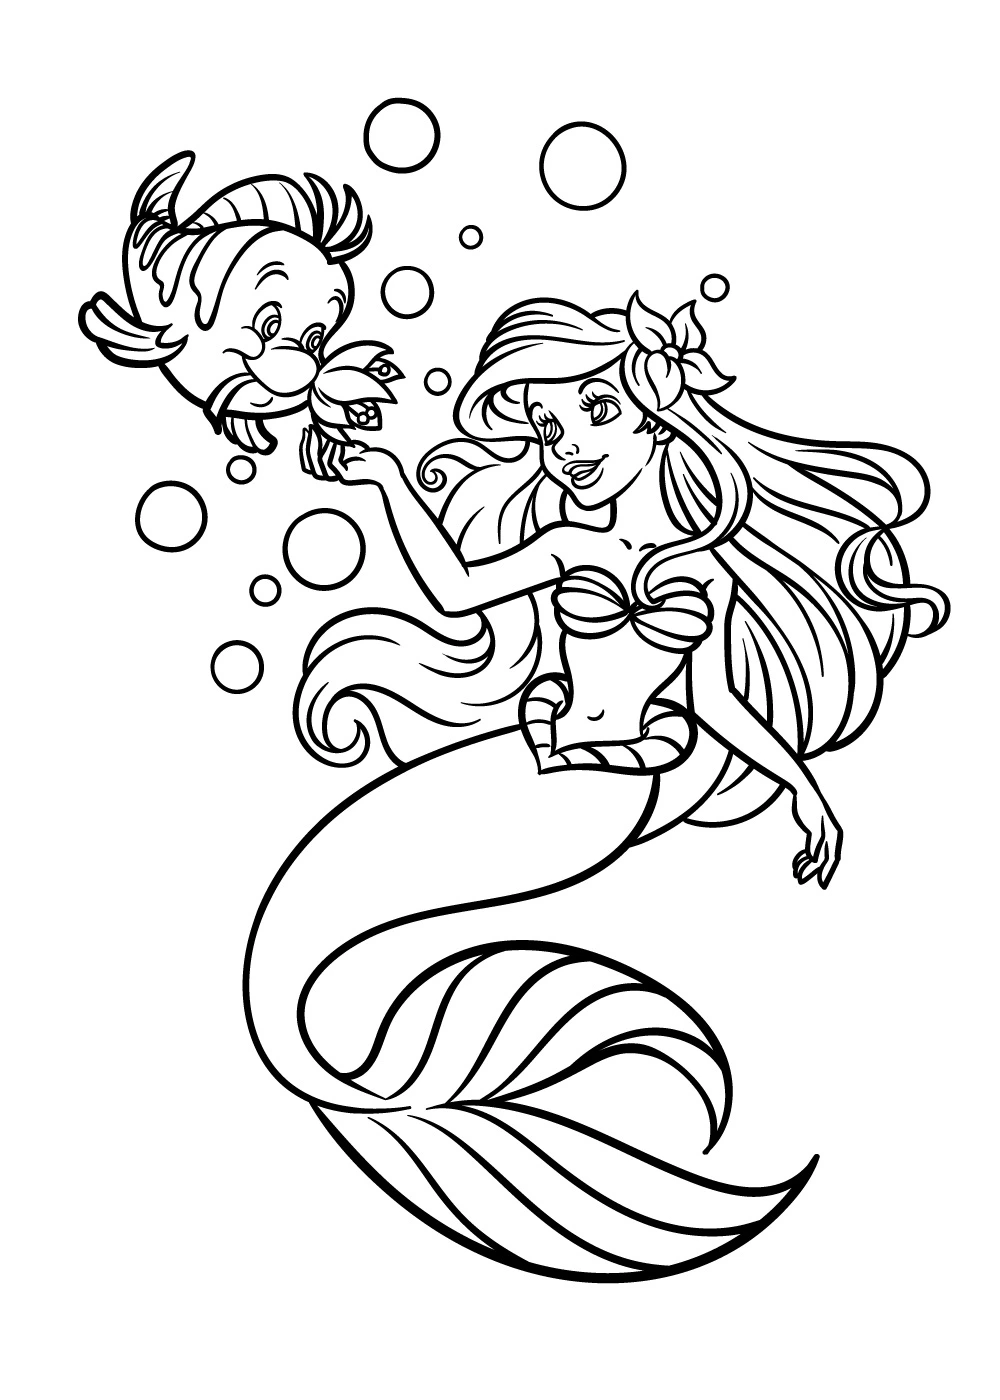 Printable Ariel and Flounder the Fish